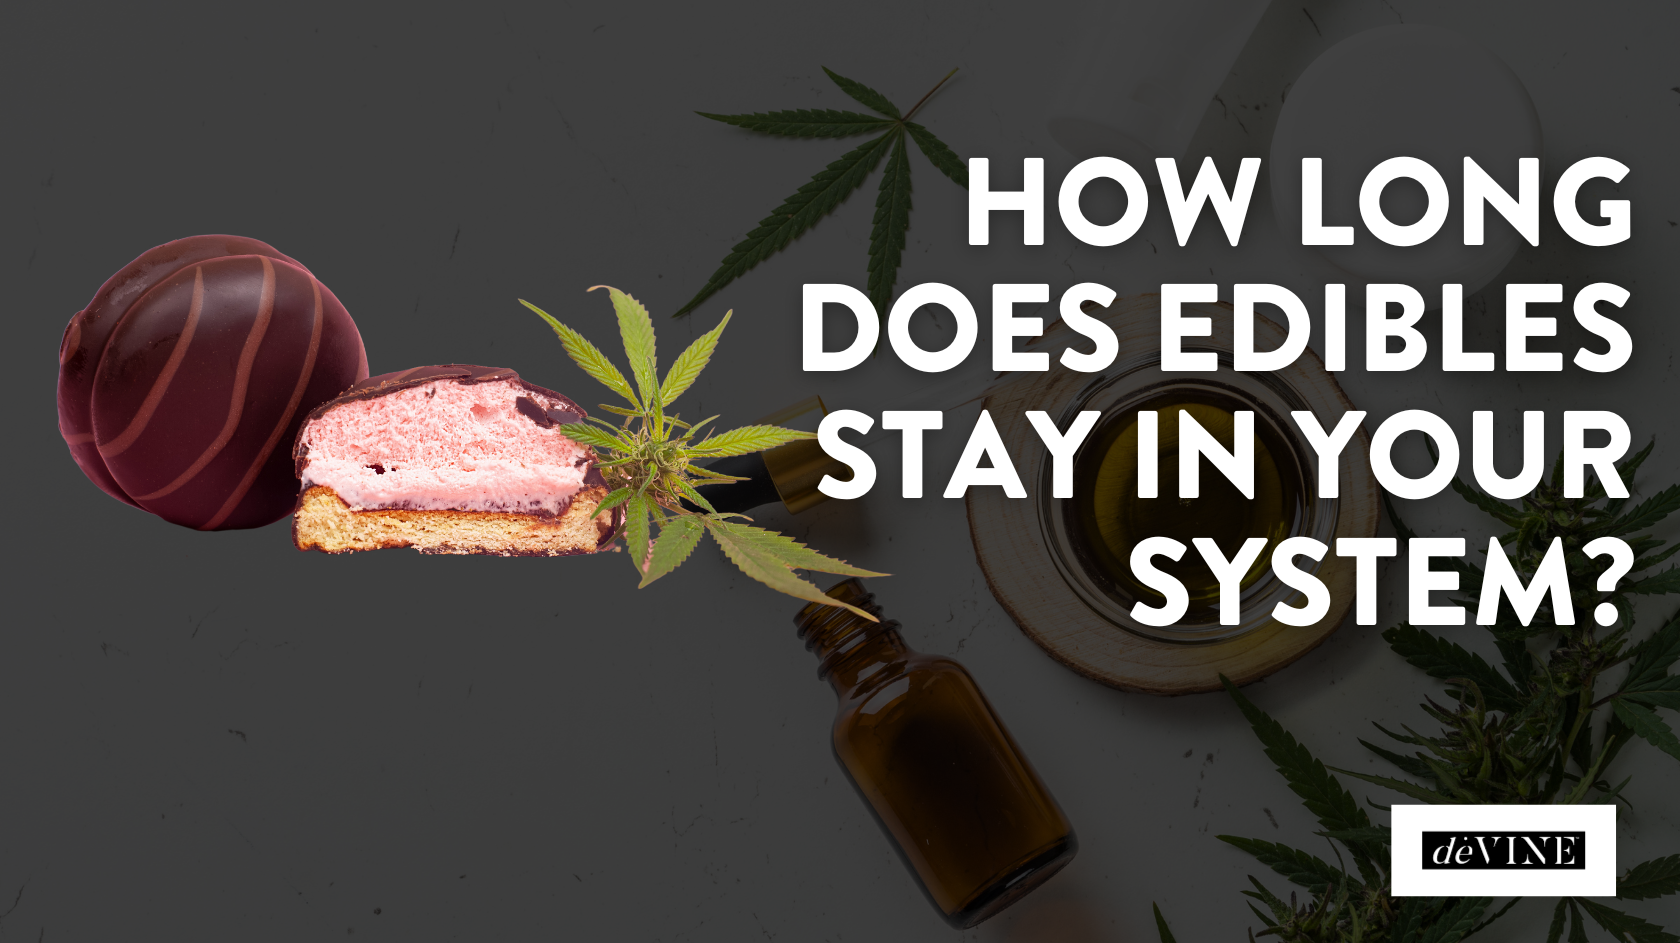 How Long Does Edibles Stay in your System?